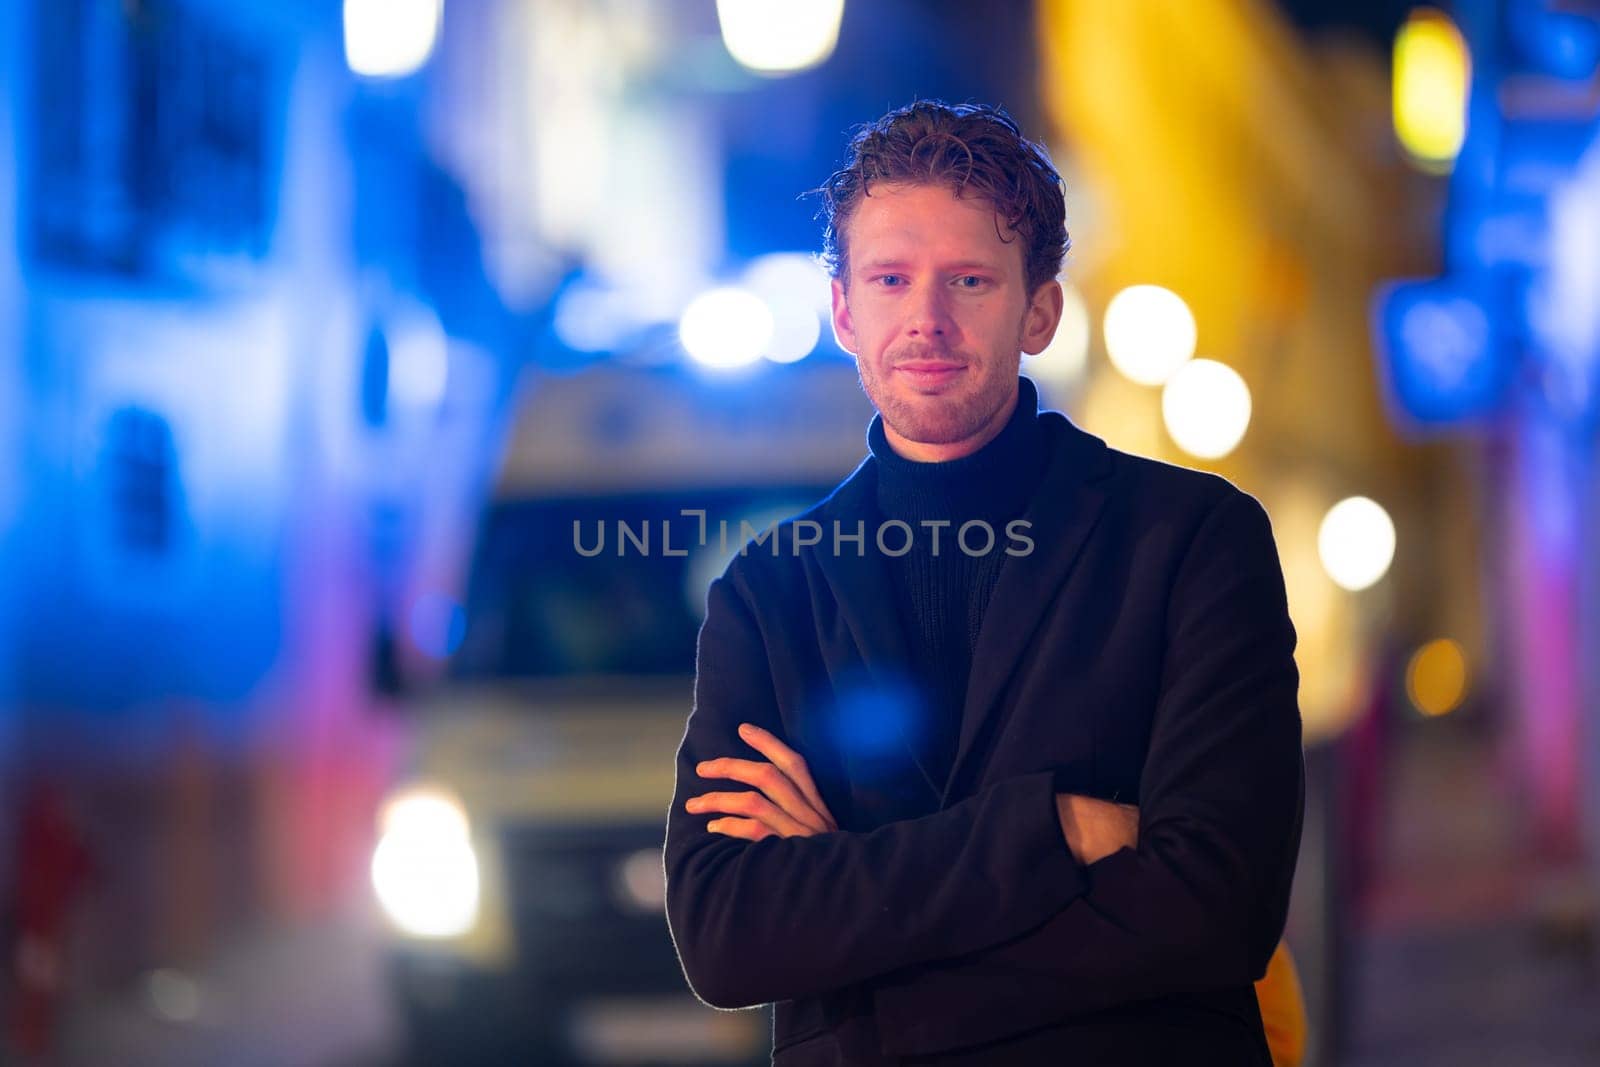 A man is standing in the street with his arms crossed. He is wearing a black jacket and a black tie. The street is lit up with bright lights, creating a moody atmosphere